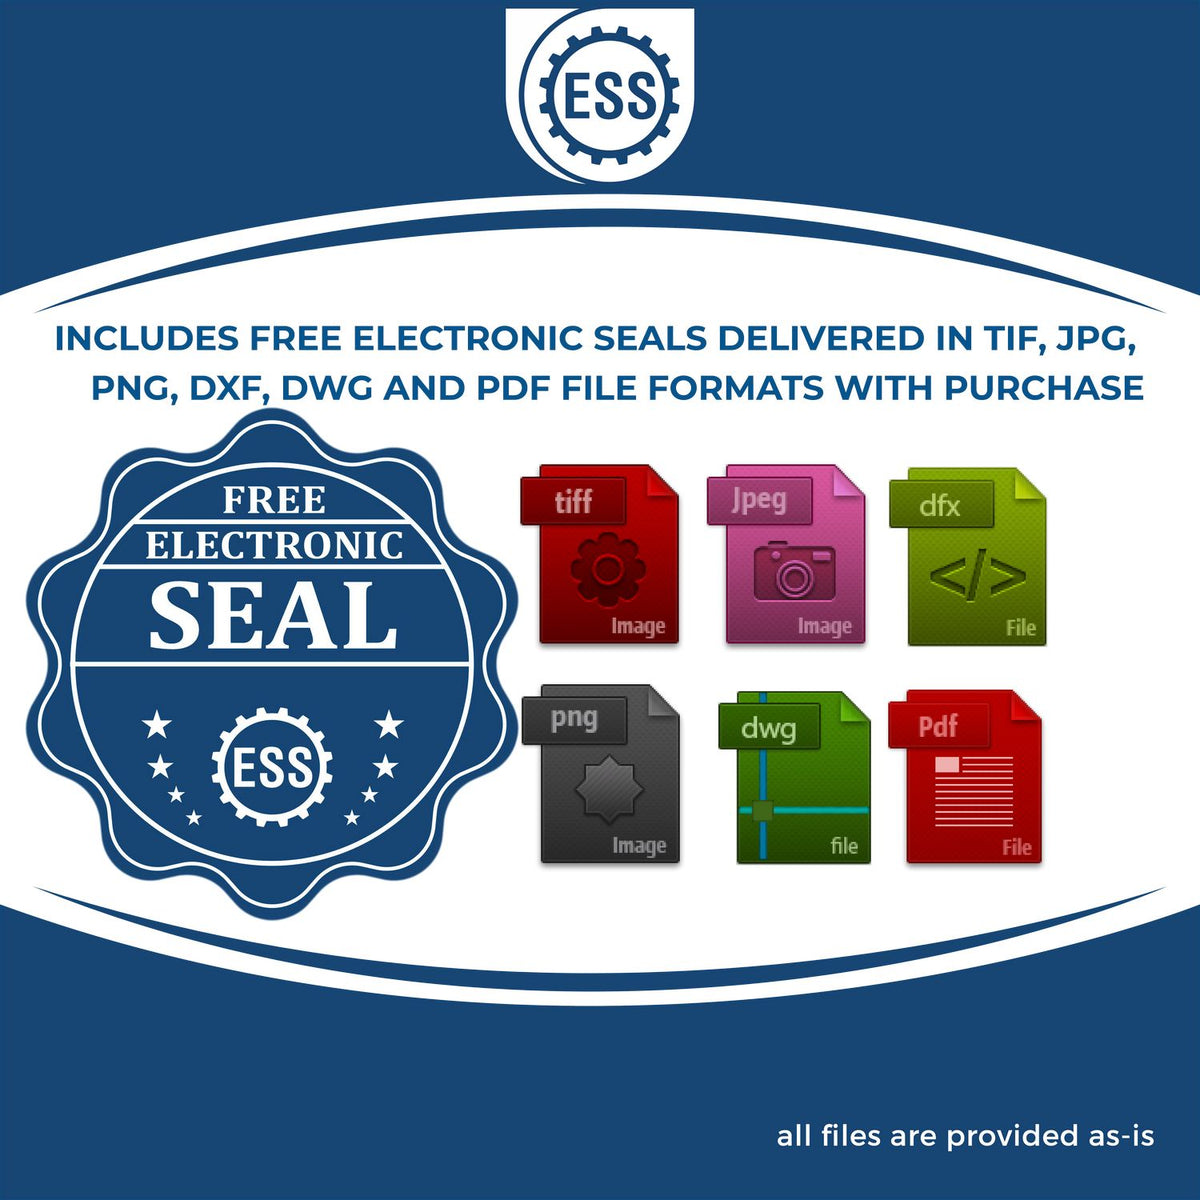 An infographic for the free electronic seal for the Hybrid Kansas Engineer Seal illustrating the different file type icons such as DXF, DWG, TIF, JPG and PNG.